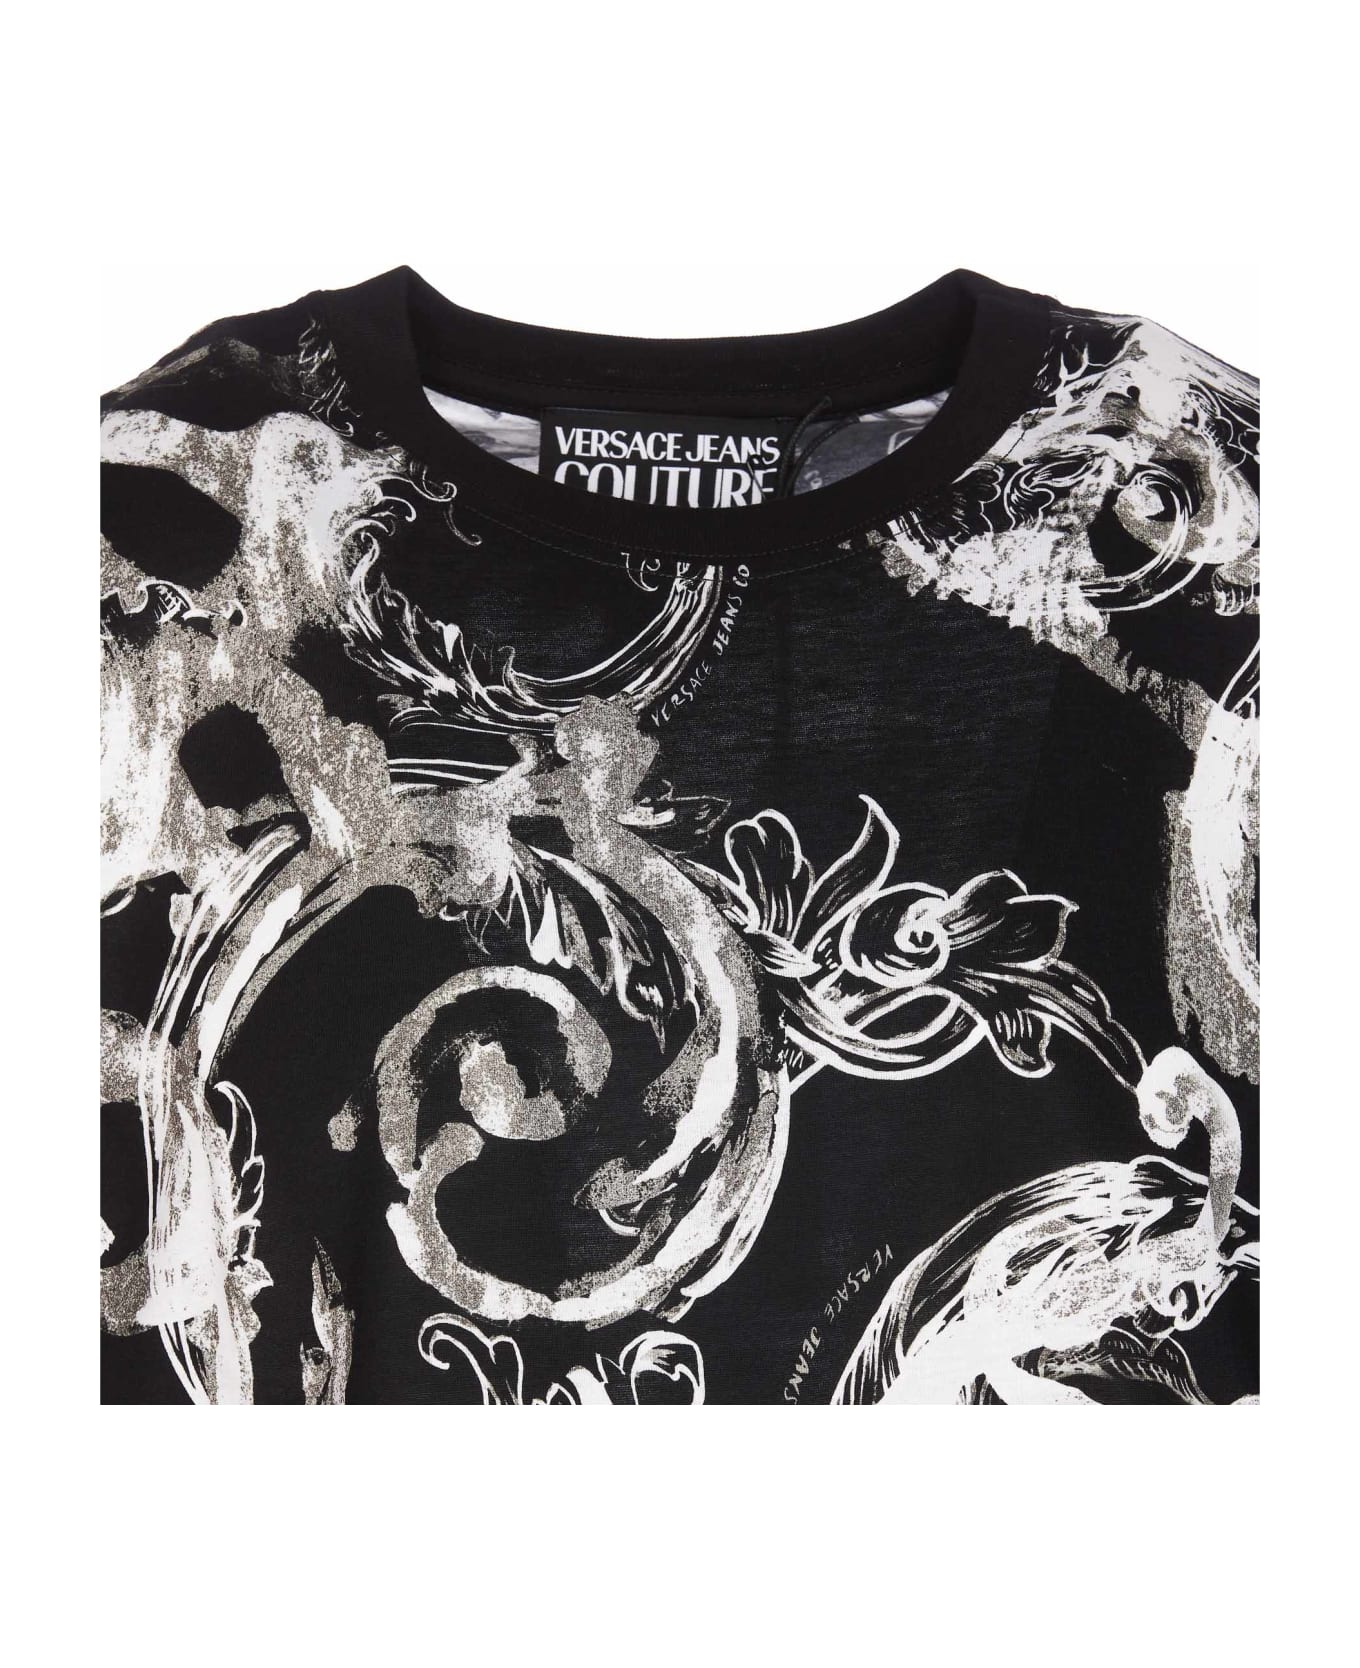 Versace Jeans Couture Watercolour Couture T-shirt - BLACK/WHITE